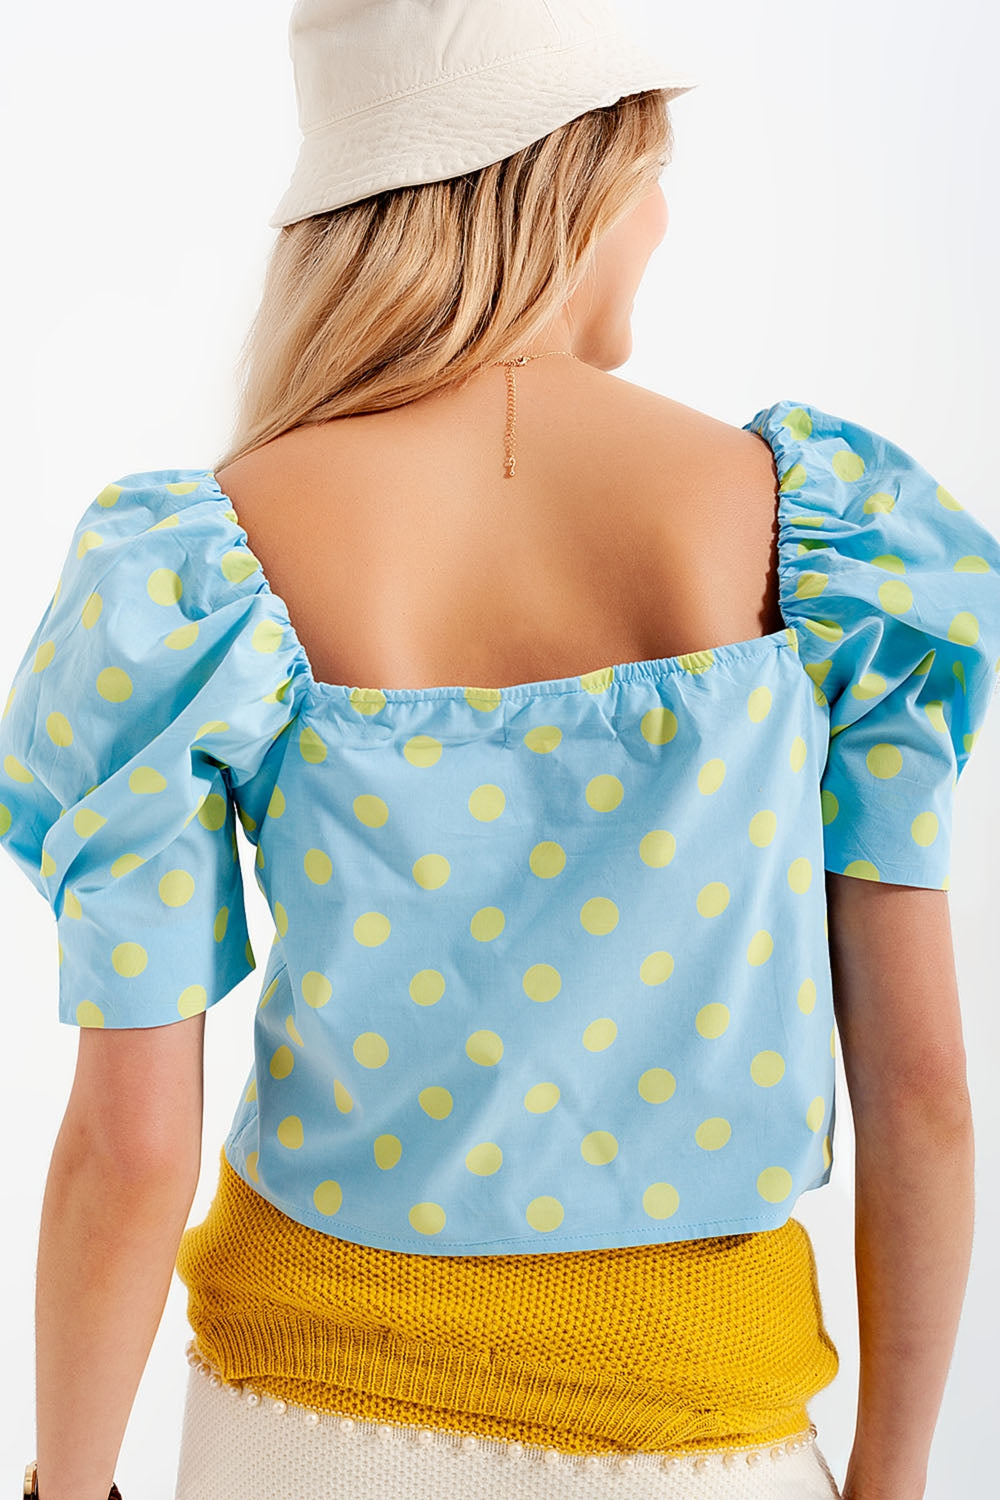 Polka Dot Top With Puffed Sleeves and Square Neckline Blue and Green